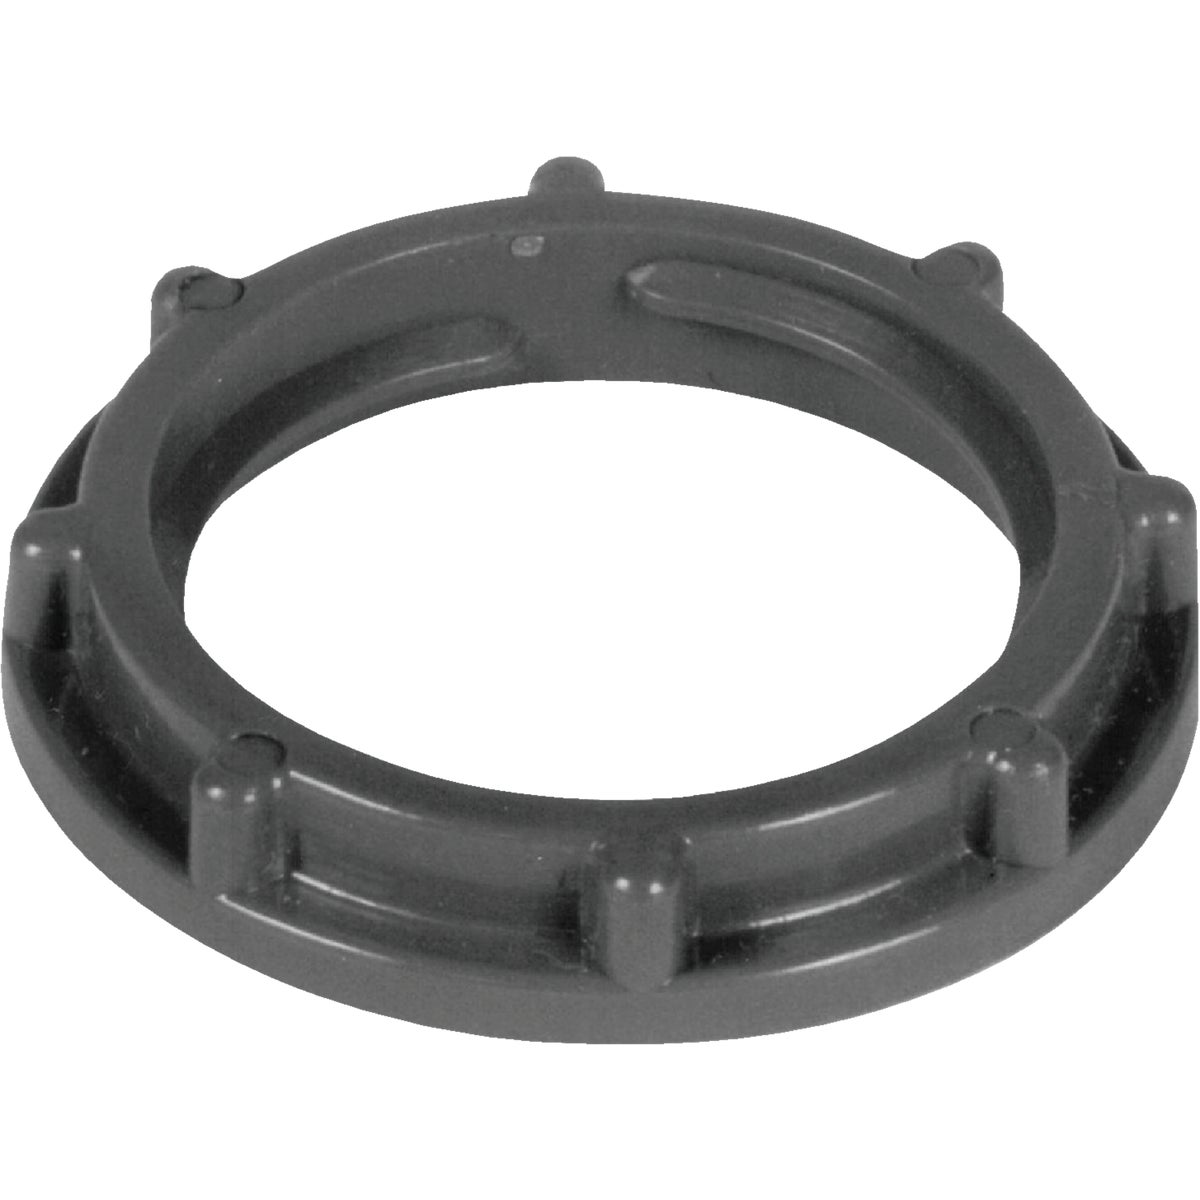 Item 538949, Locknut ideal for use with PVC (polyvinyl chloride) conduit.